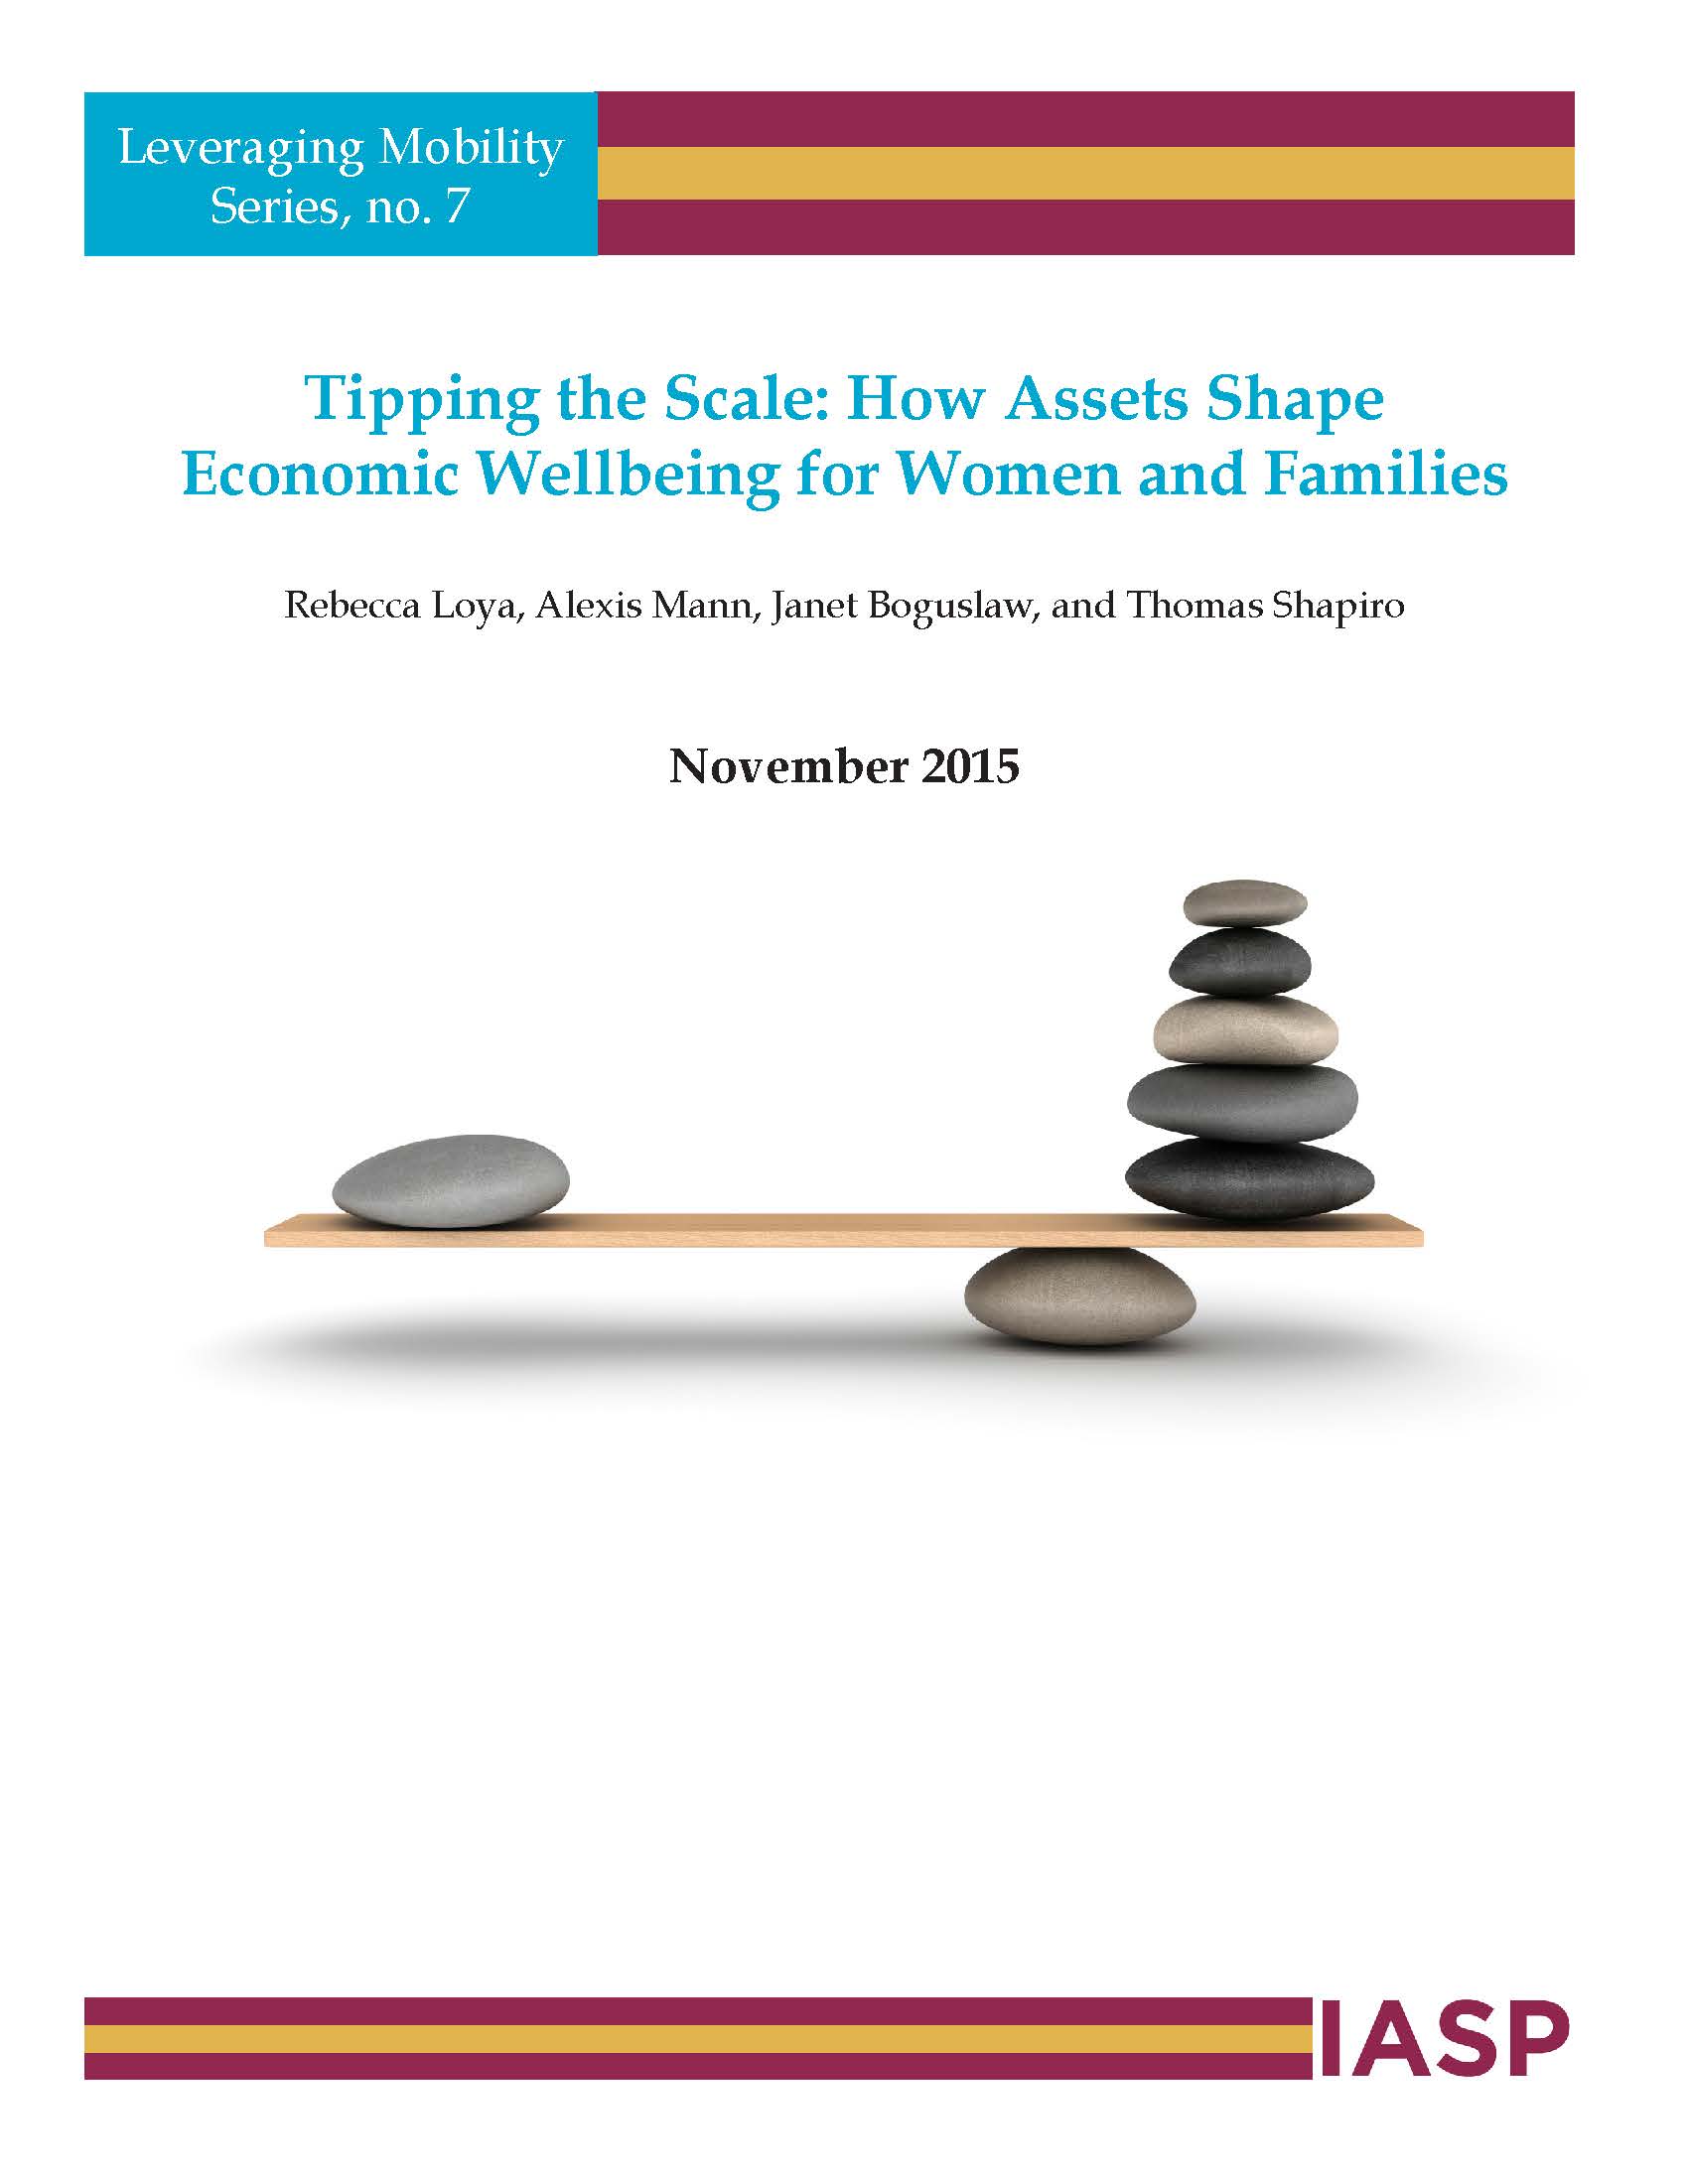 Cover for Tipping the Scales report